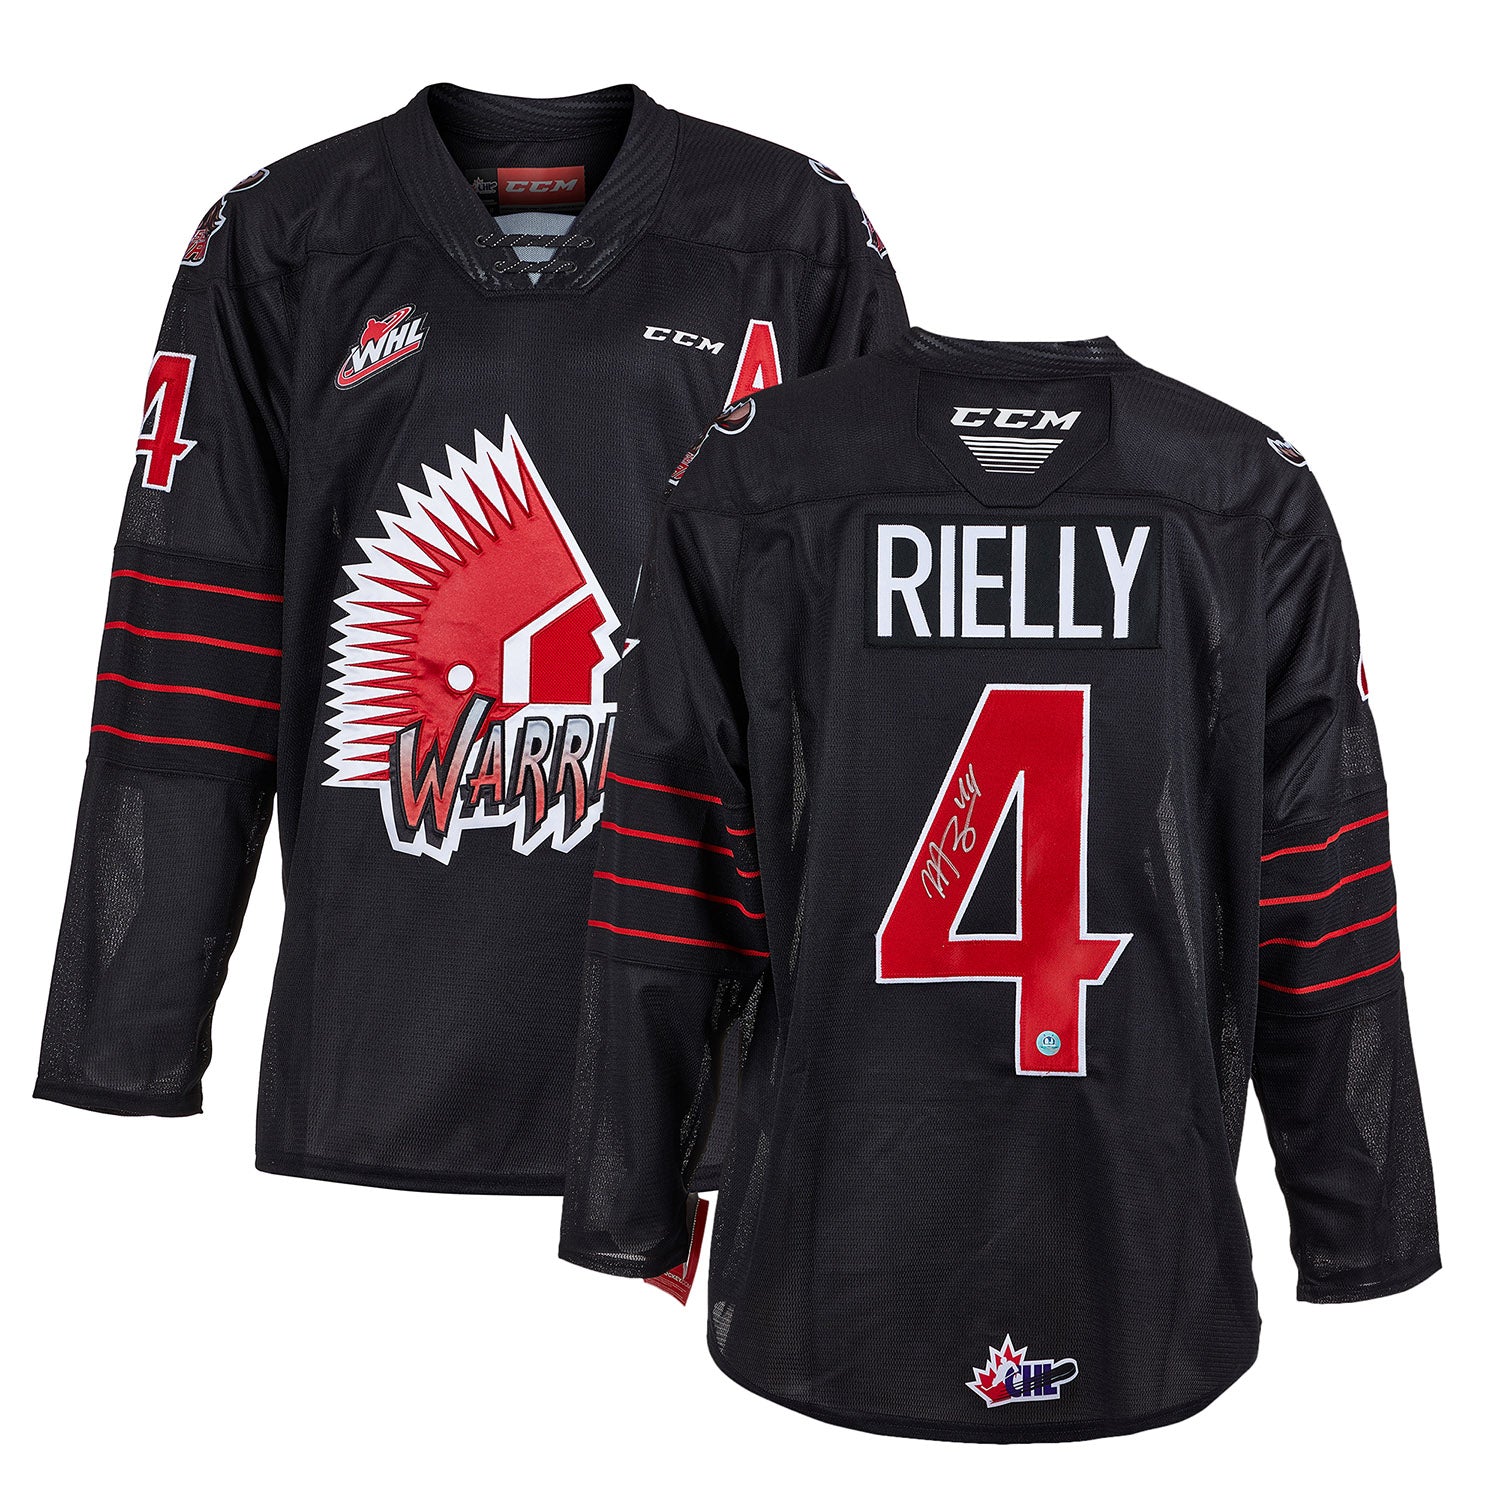 Morgan Rielly Moose Jaw Warriors Autographed CHL Hockey Jersey